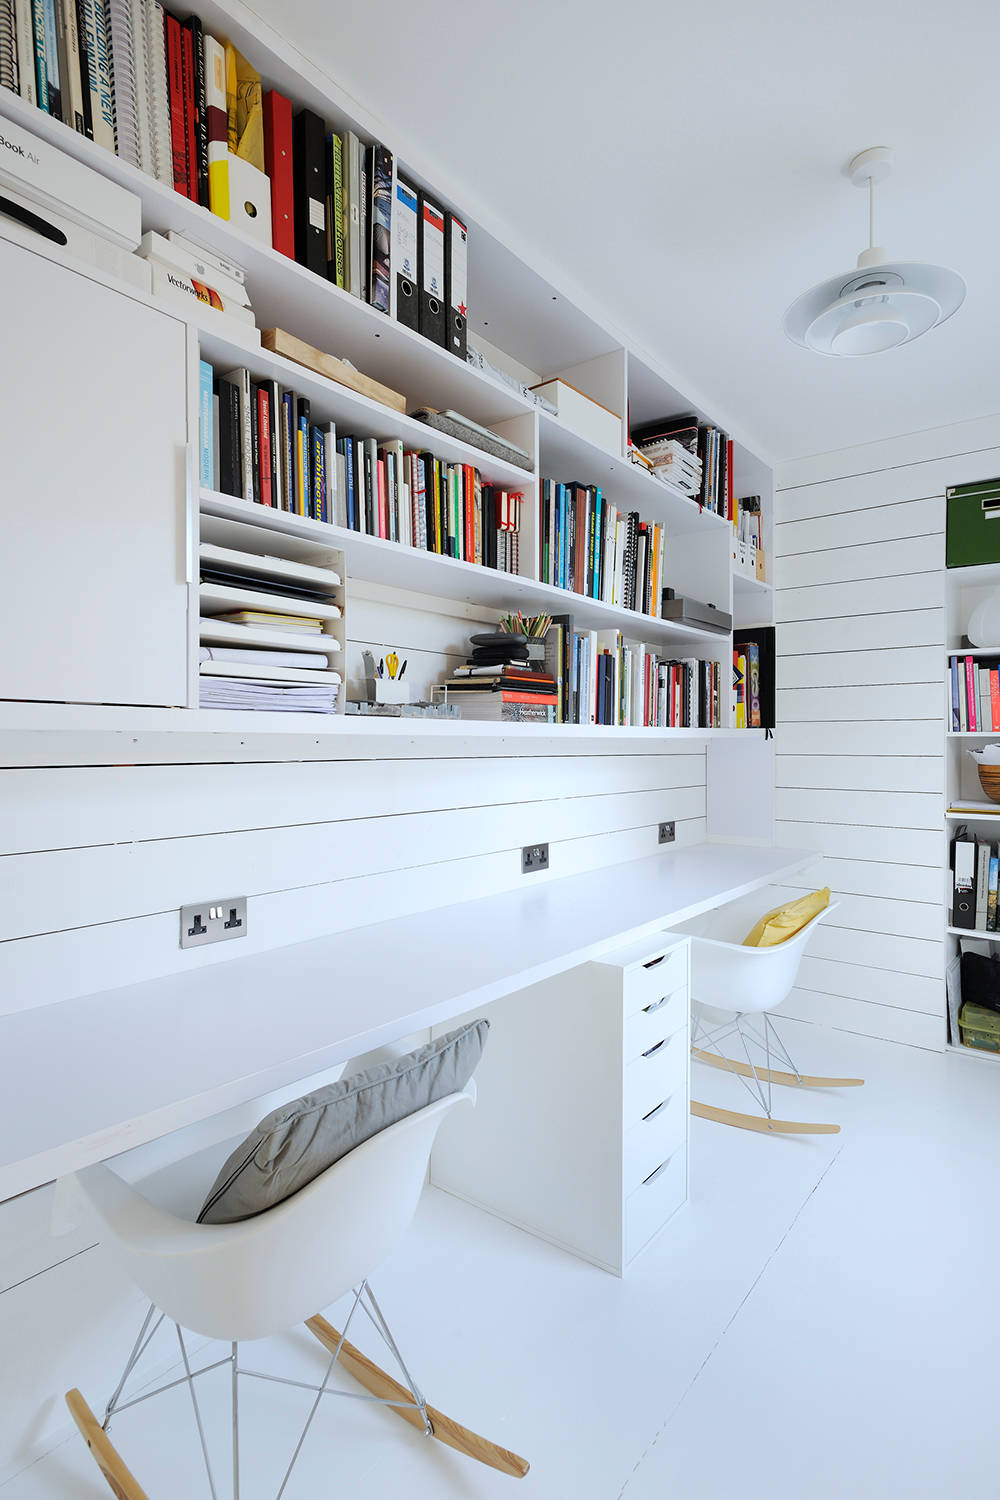 Storage Decluttering Home Office Renovation: Tips and Tricks for a Productive Workplace - 1